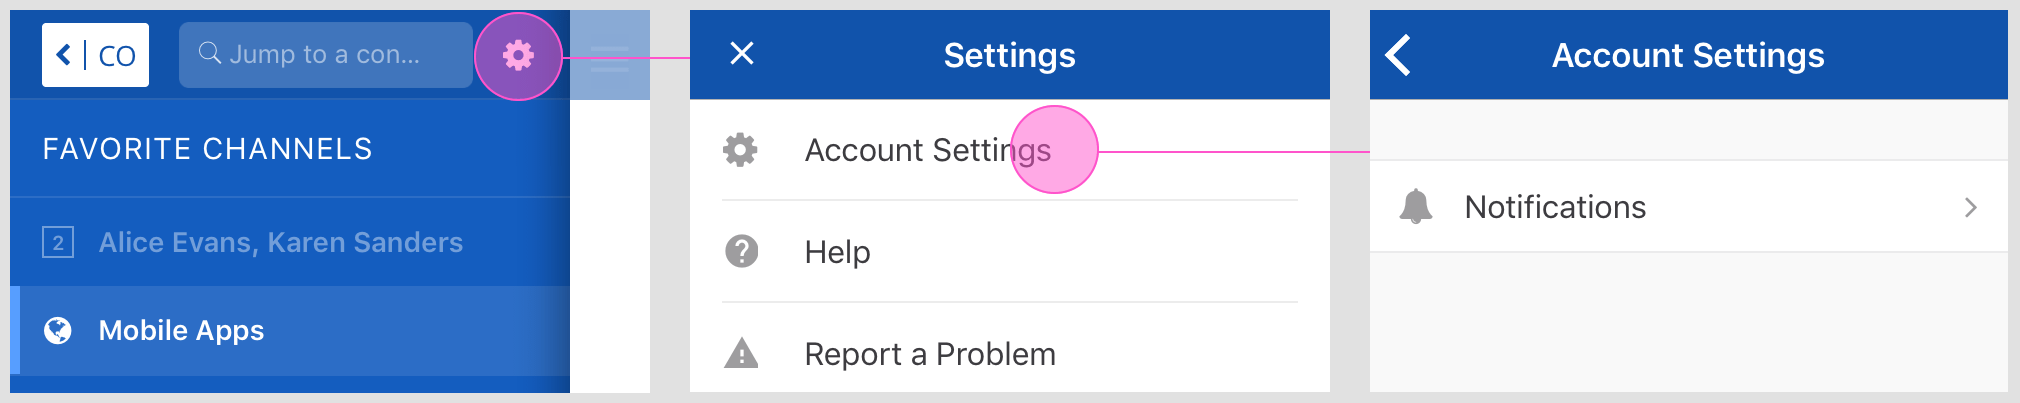 Ensure push notifications are enabled by selecting the Settings icon located in the top-right corner of the screen.